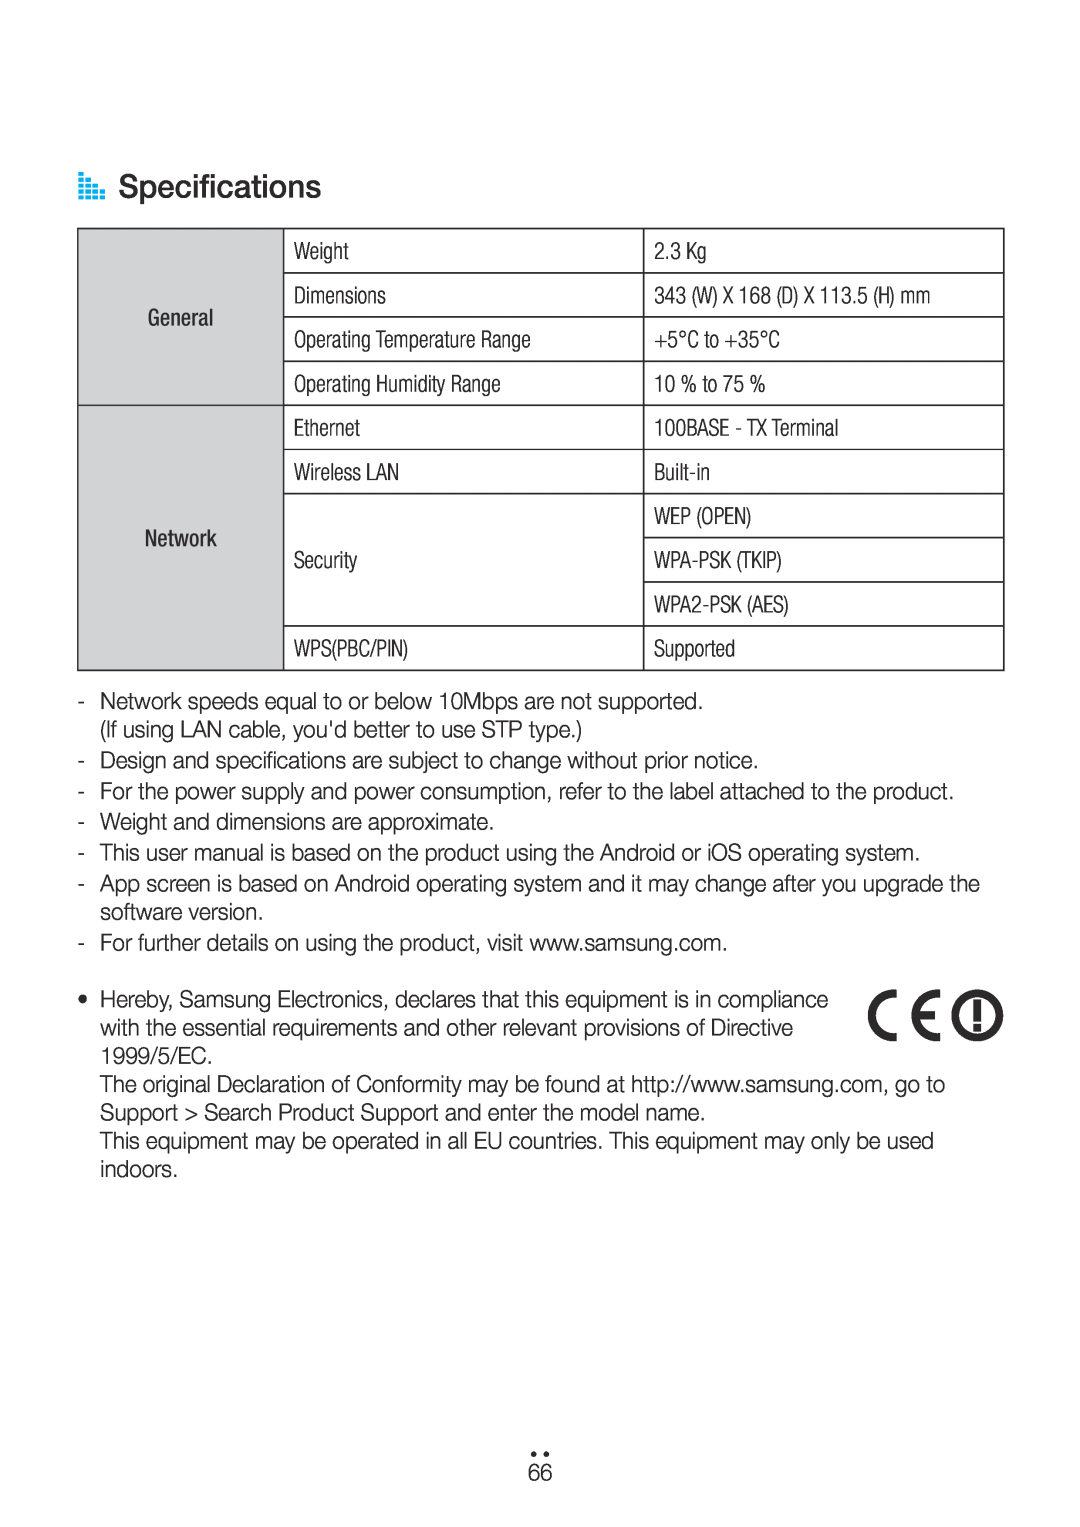 Samsung M5 user manual AA Specifications 